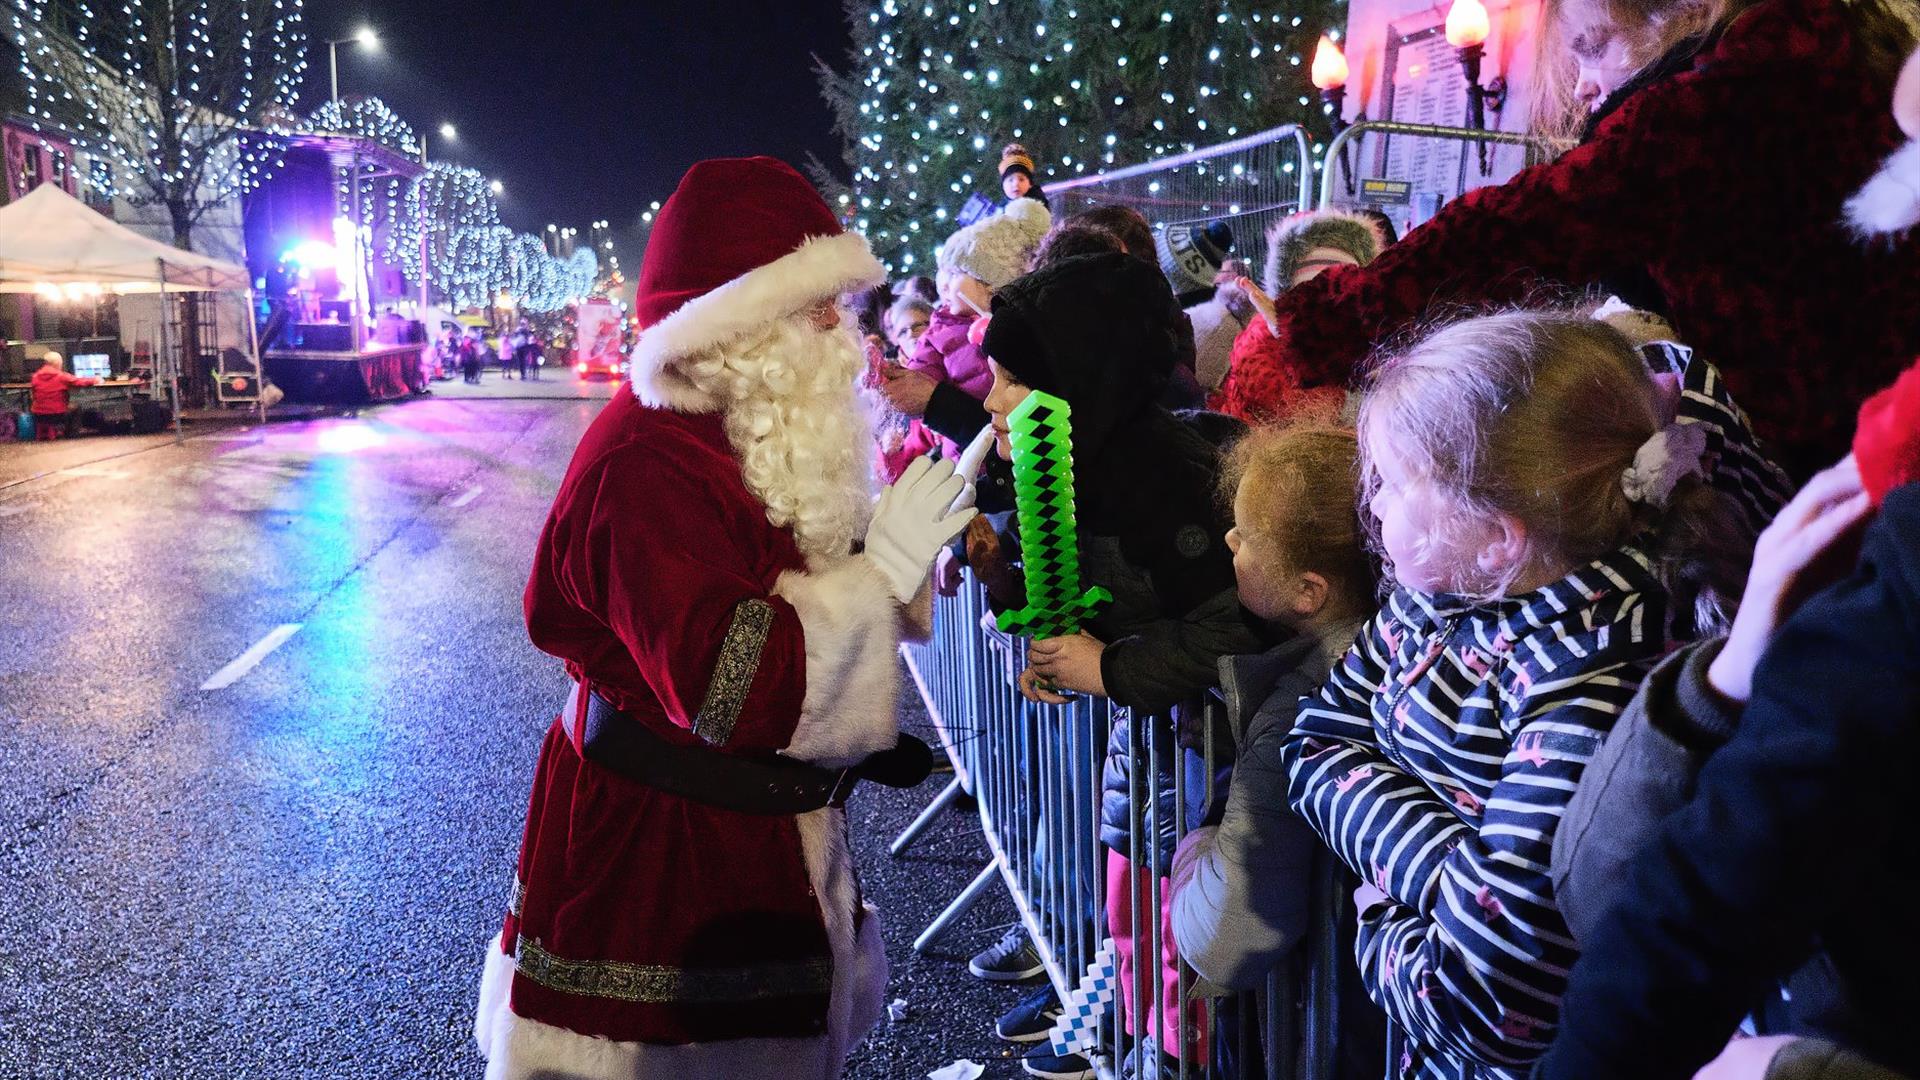 Santa greets a large crowd on the main street of Cookstown